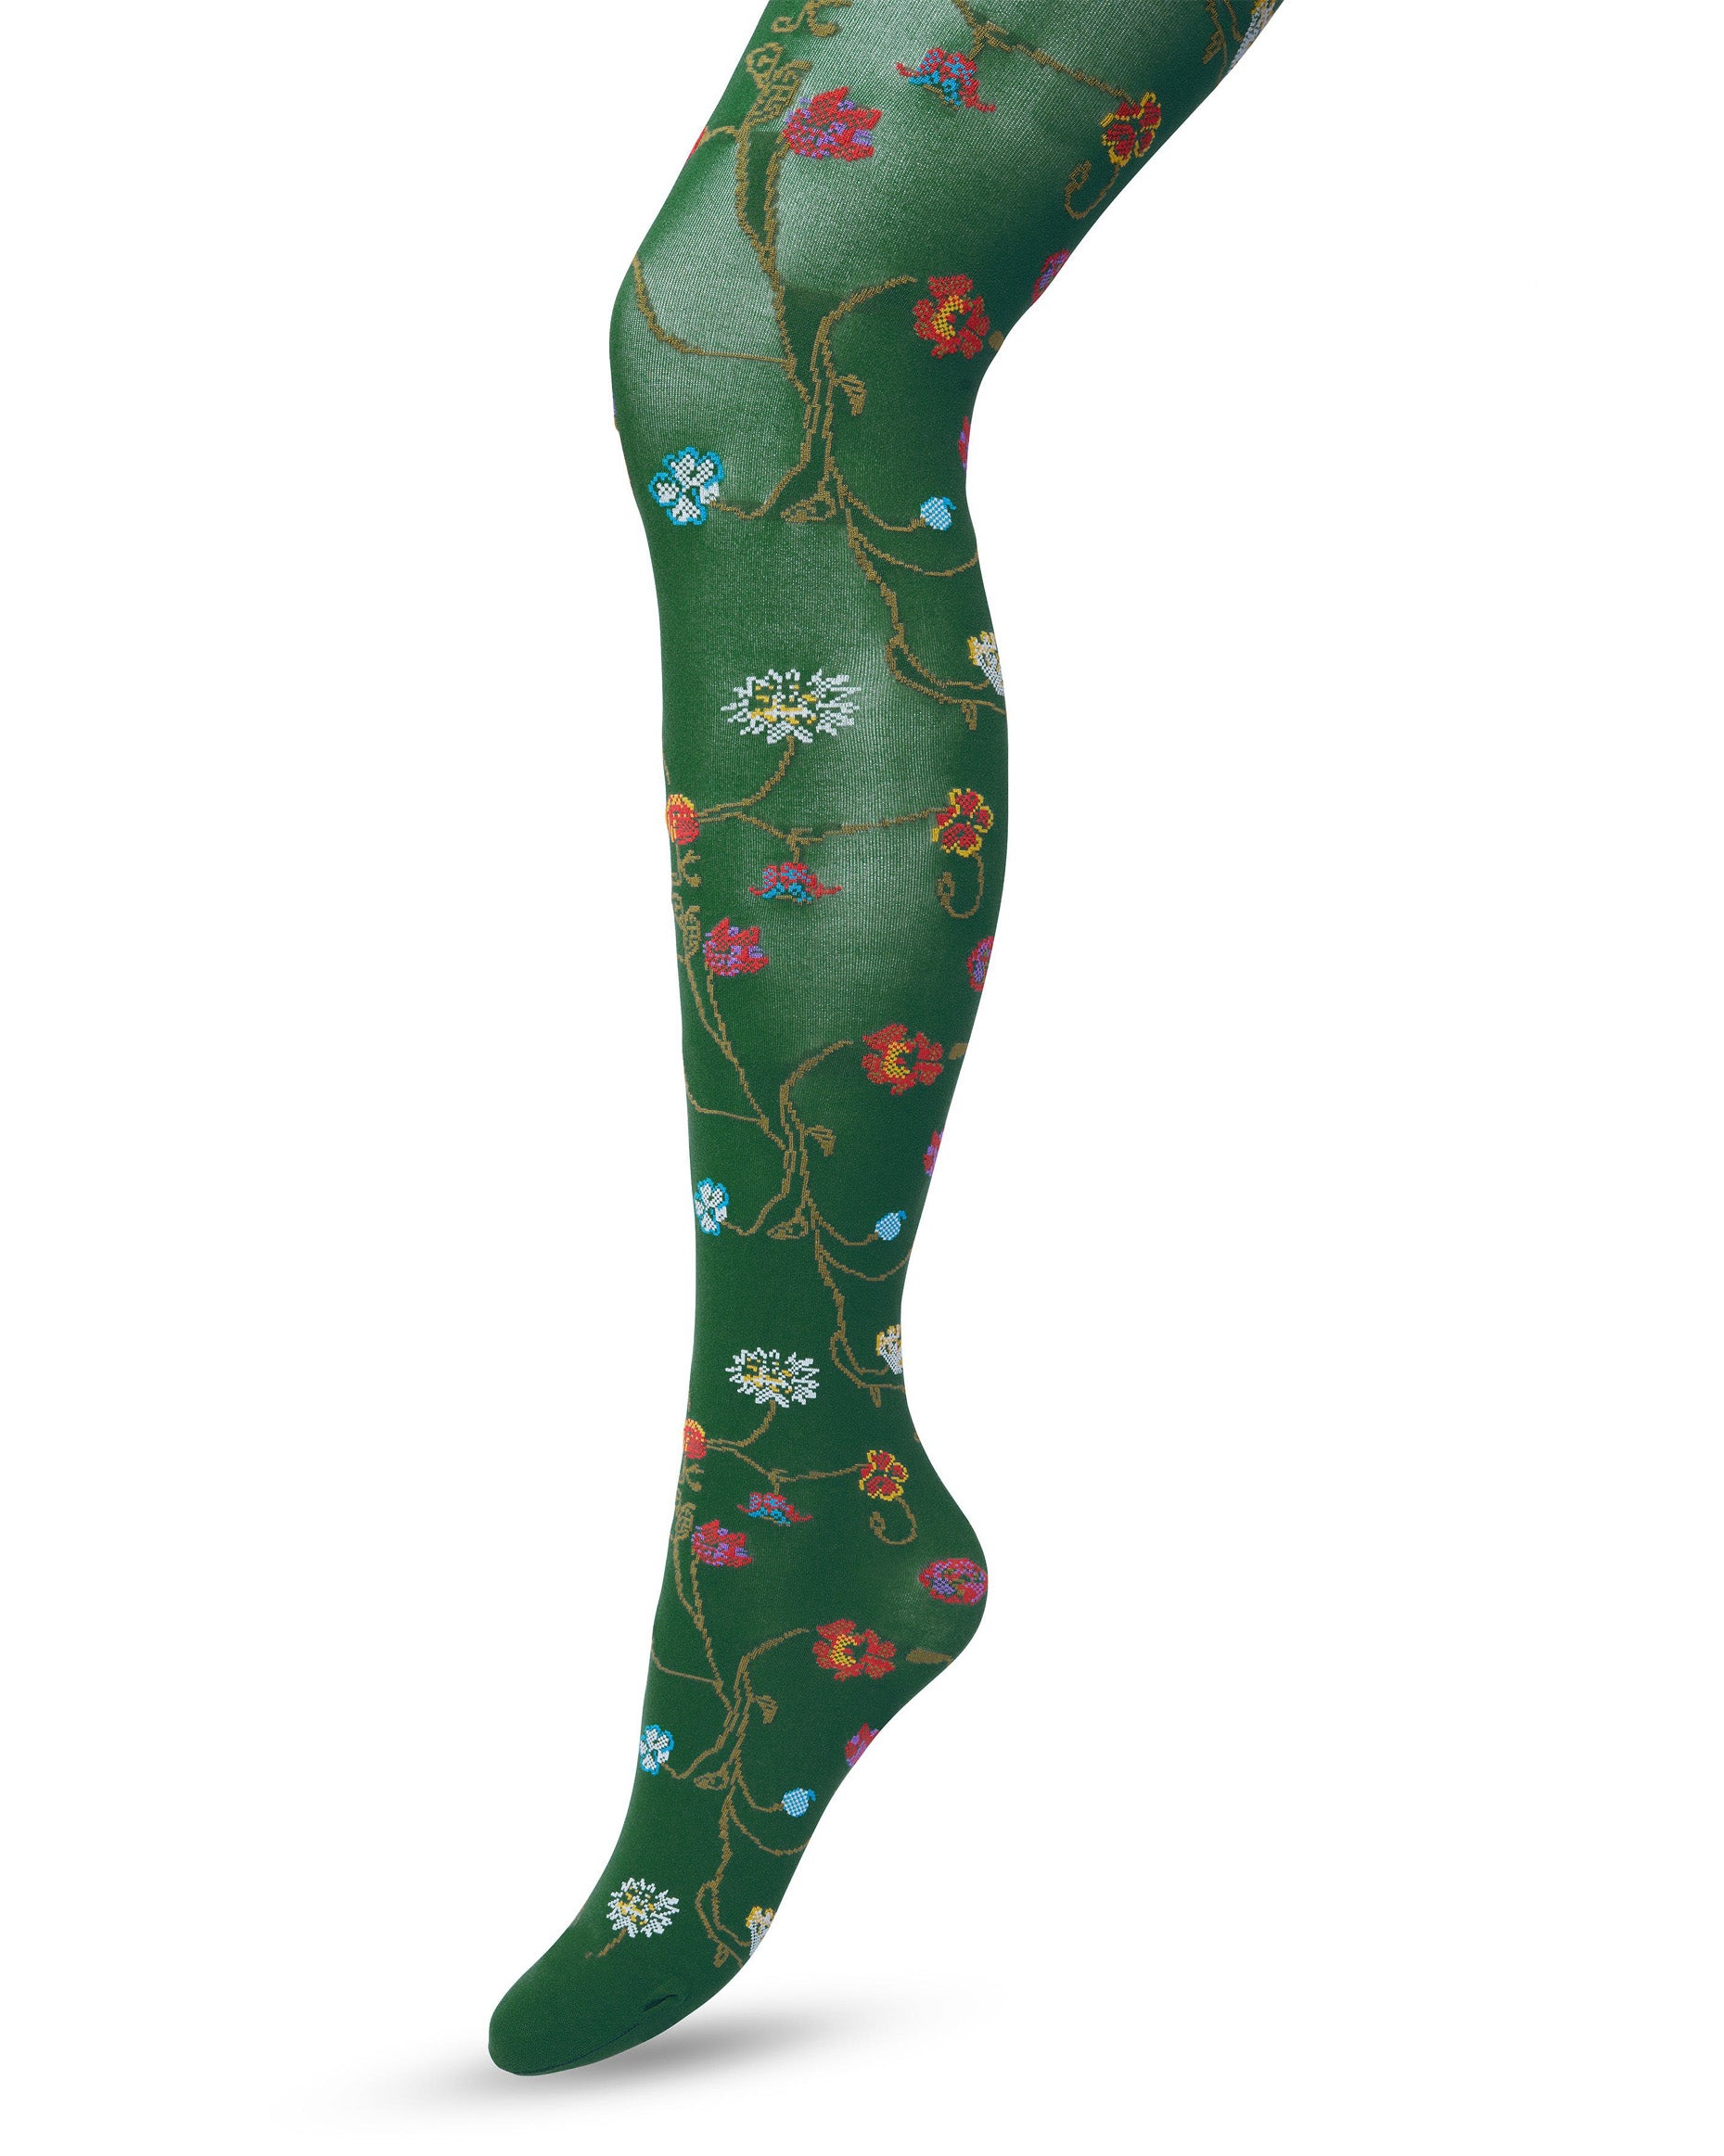 Bonnie Doon Floral Tights - Soft dark green (trekking) opaque fashion tights with a multicoloured woven floral pattern